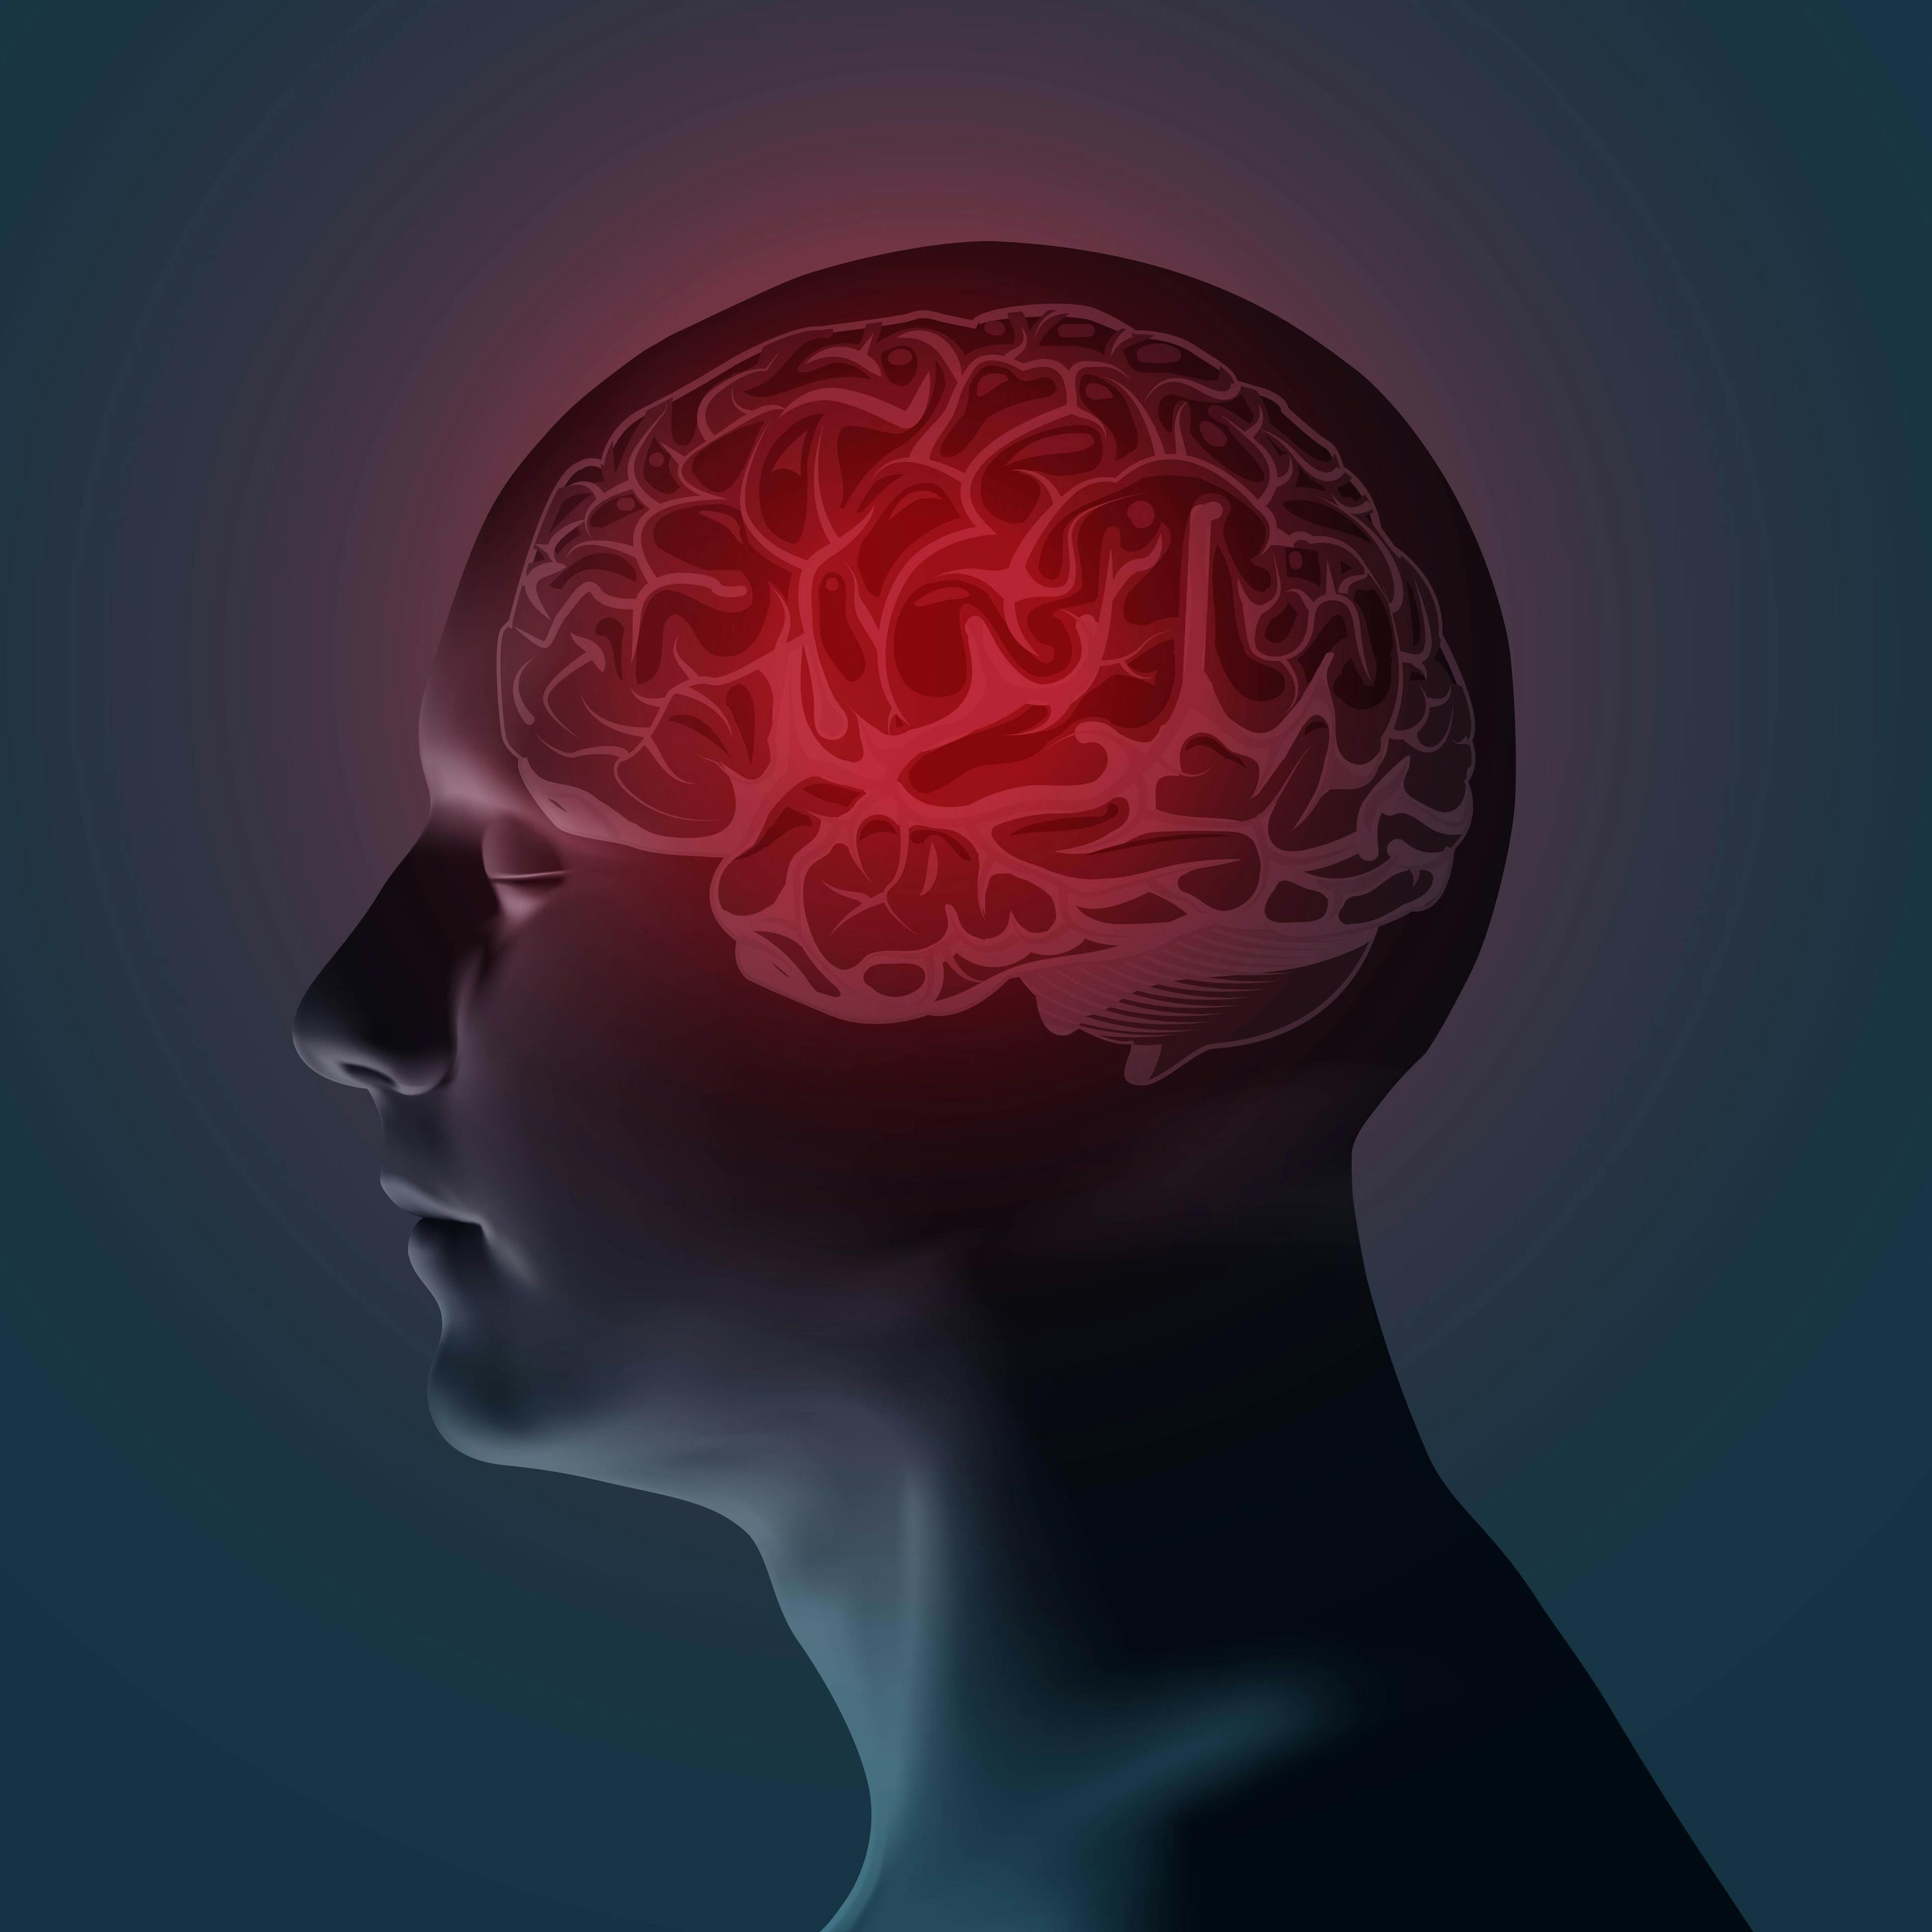 Study: Abbott’s 2 Blood-Based Biomarkers Can Predict Severity of Traumatic Brain Injury